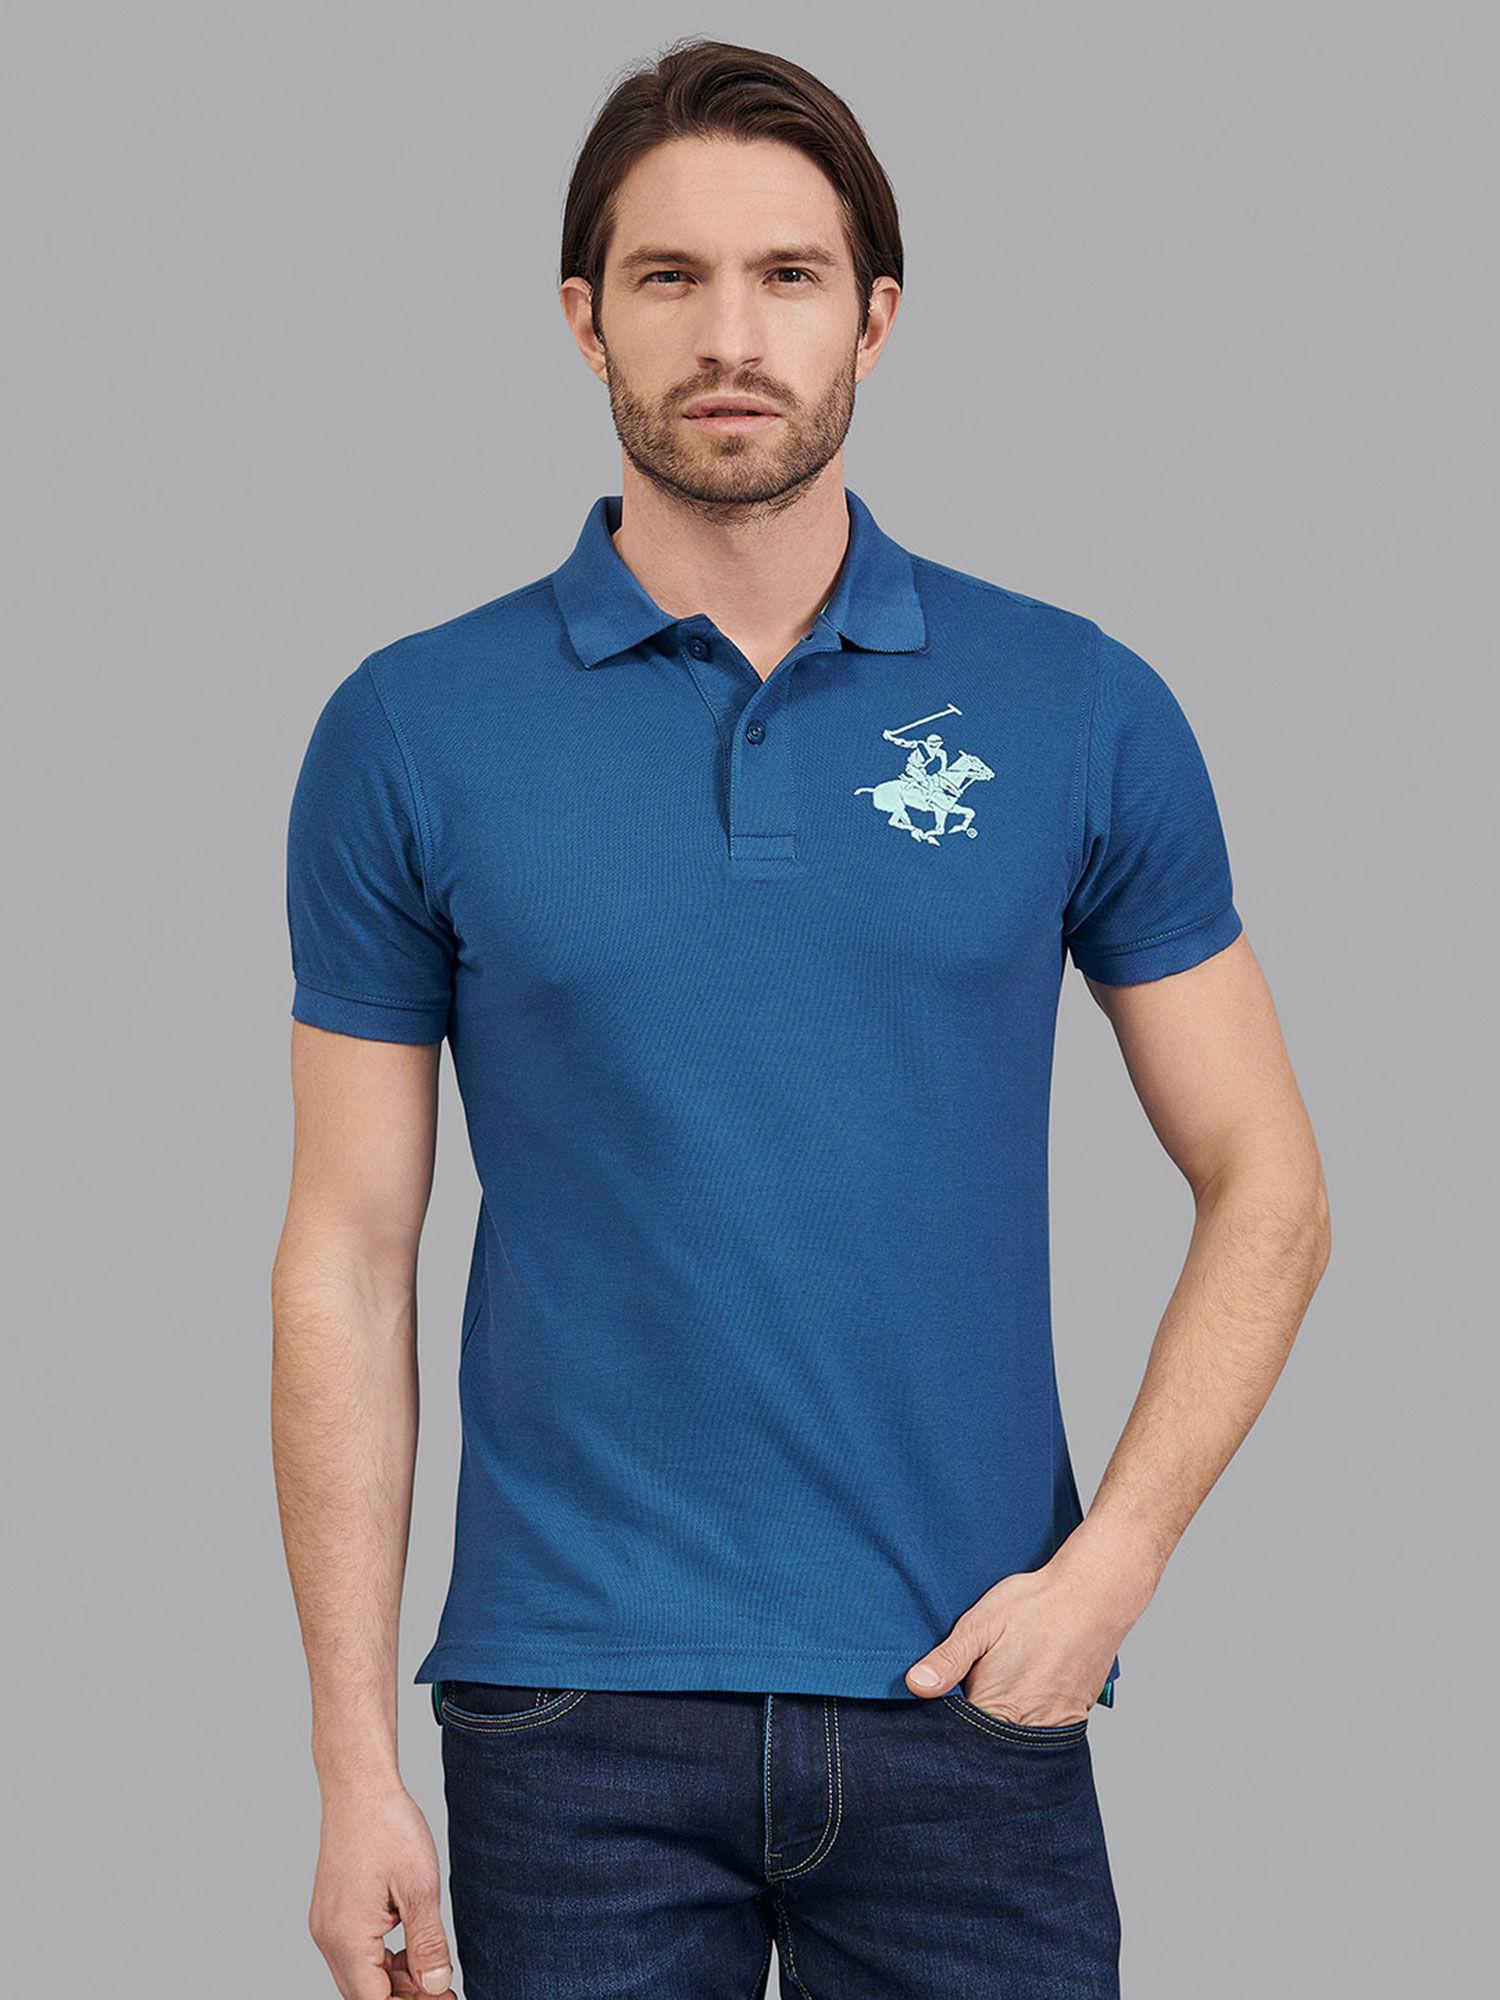 core-plaited-collar-and-cuff-polo-t-shirts